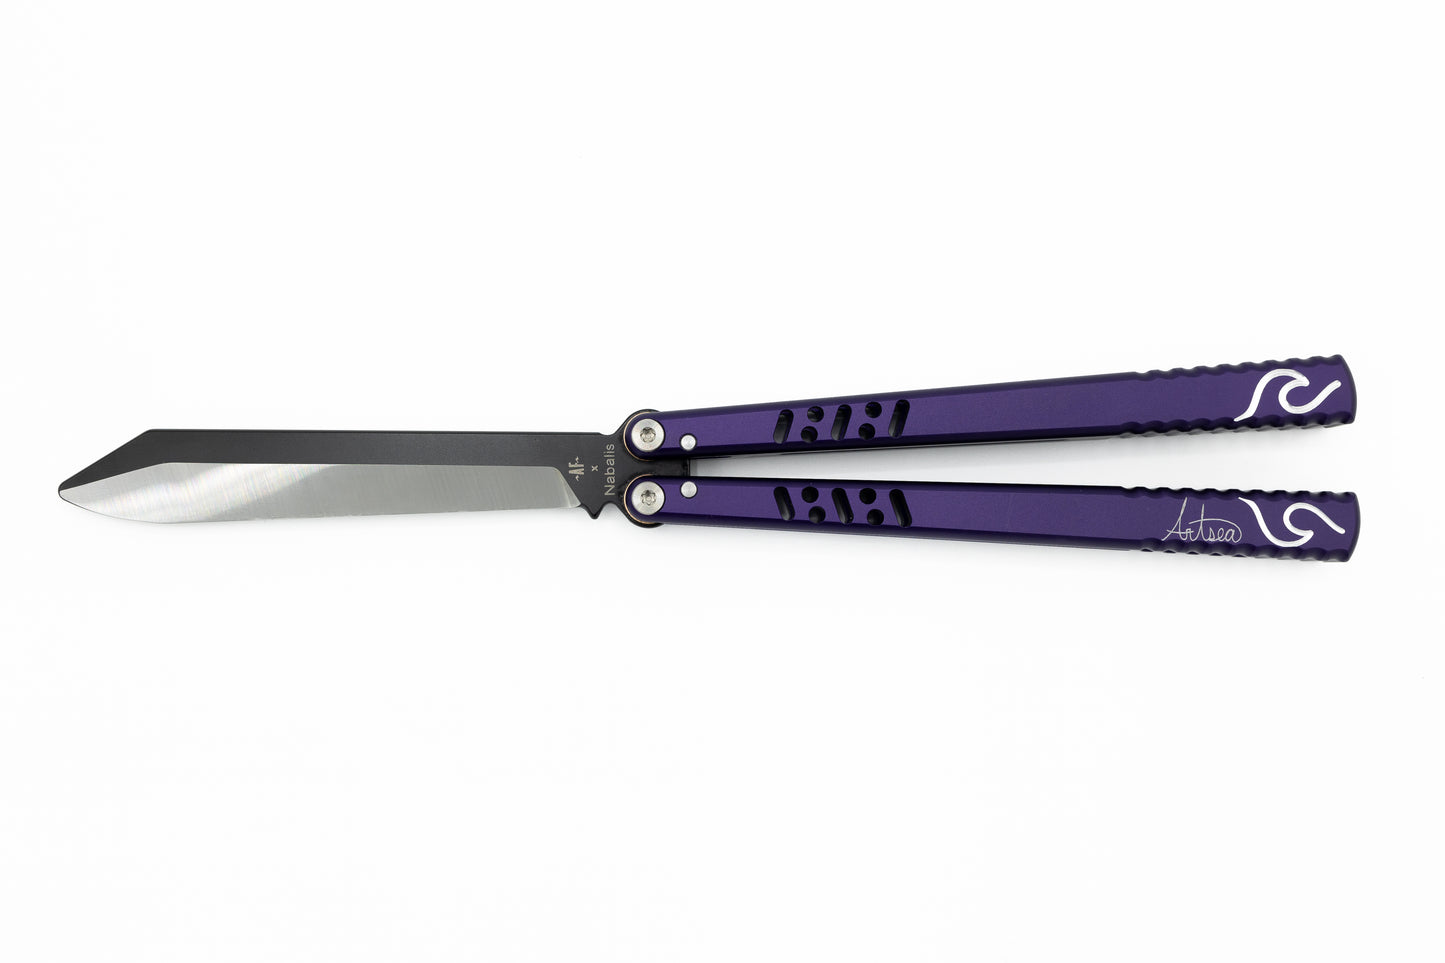 The Wave Balisong Trainer